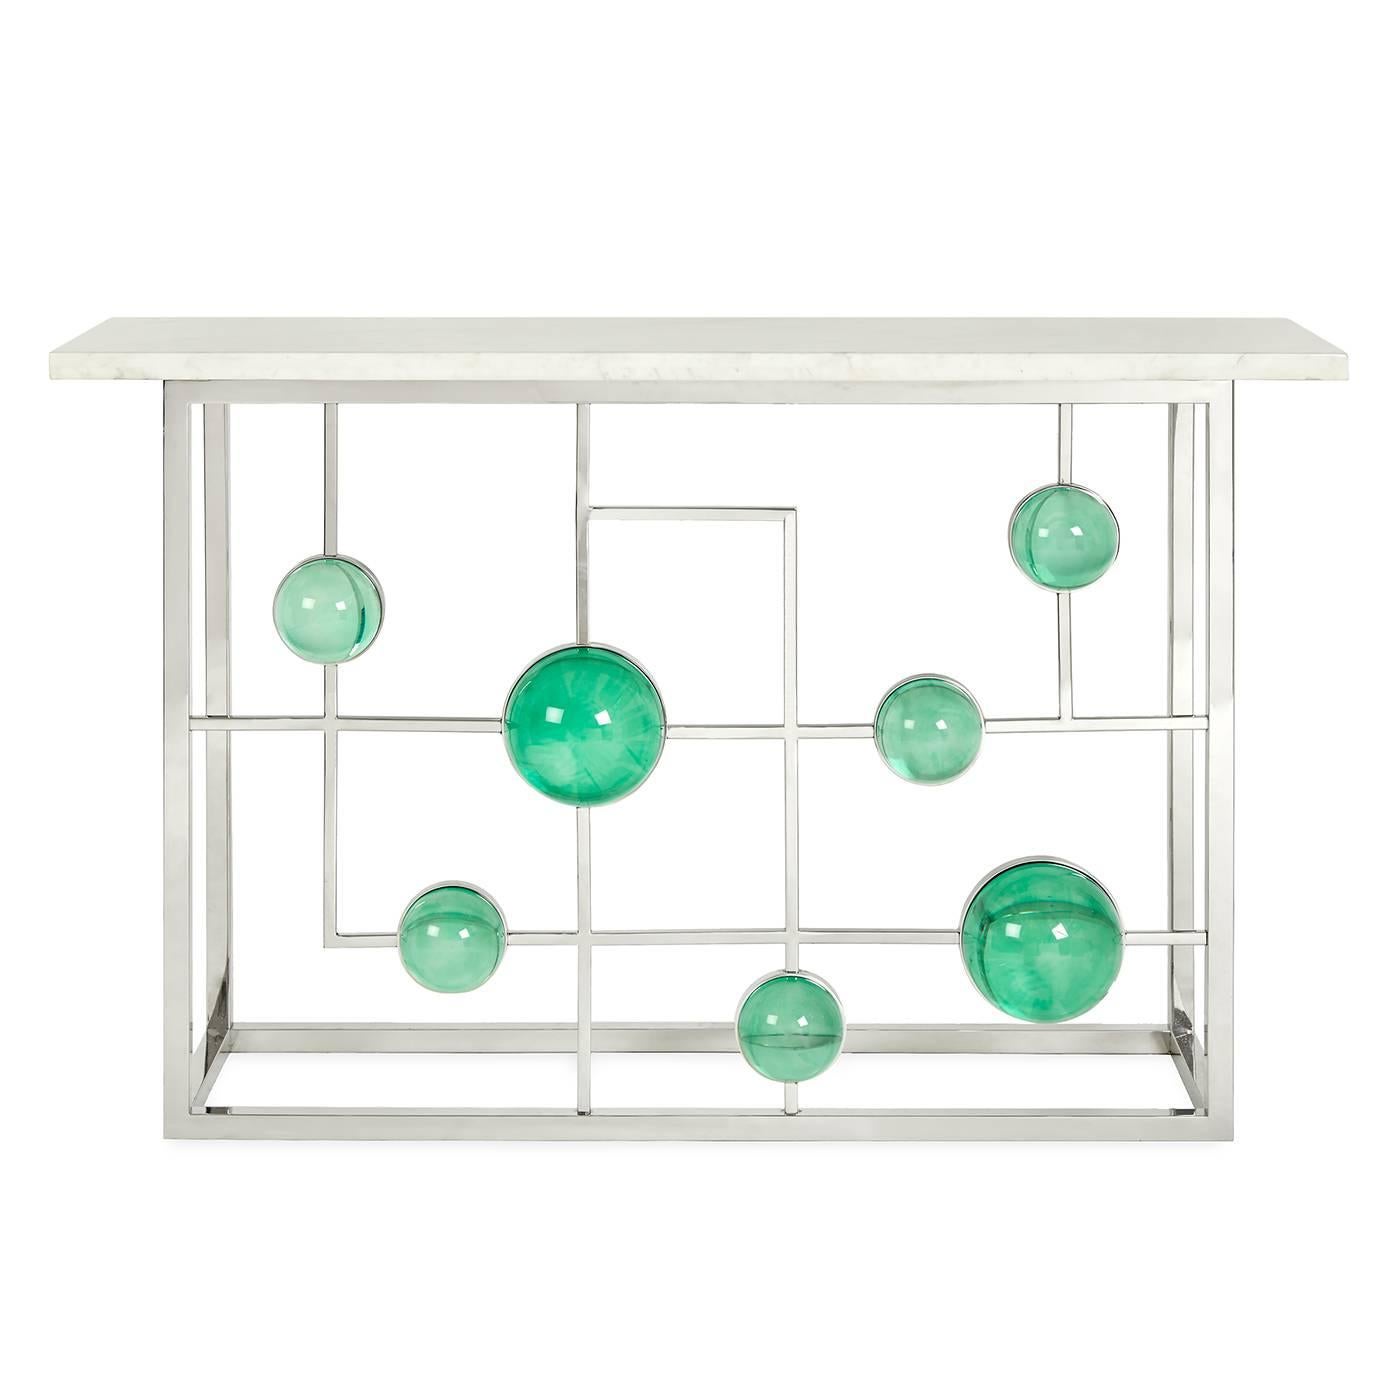 Futuristic elegance. A polished nickel fretwork cradles a constellation of emerald Lucite cabochons. Topped with a generous slab of Carrara marble, our Globo fretwork console is petite but powerful, like a glamorous cocktail ring. Fab in a foyer or